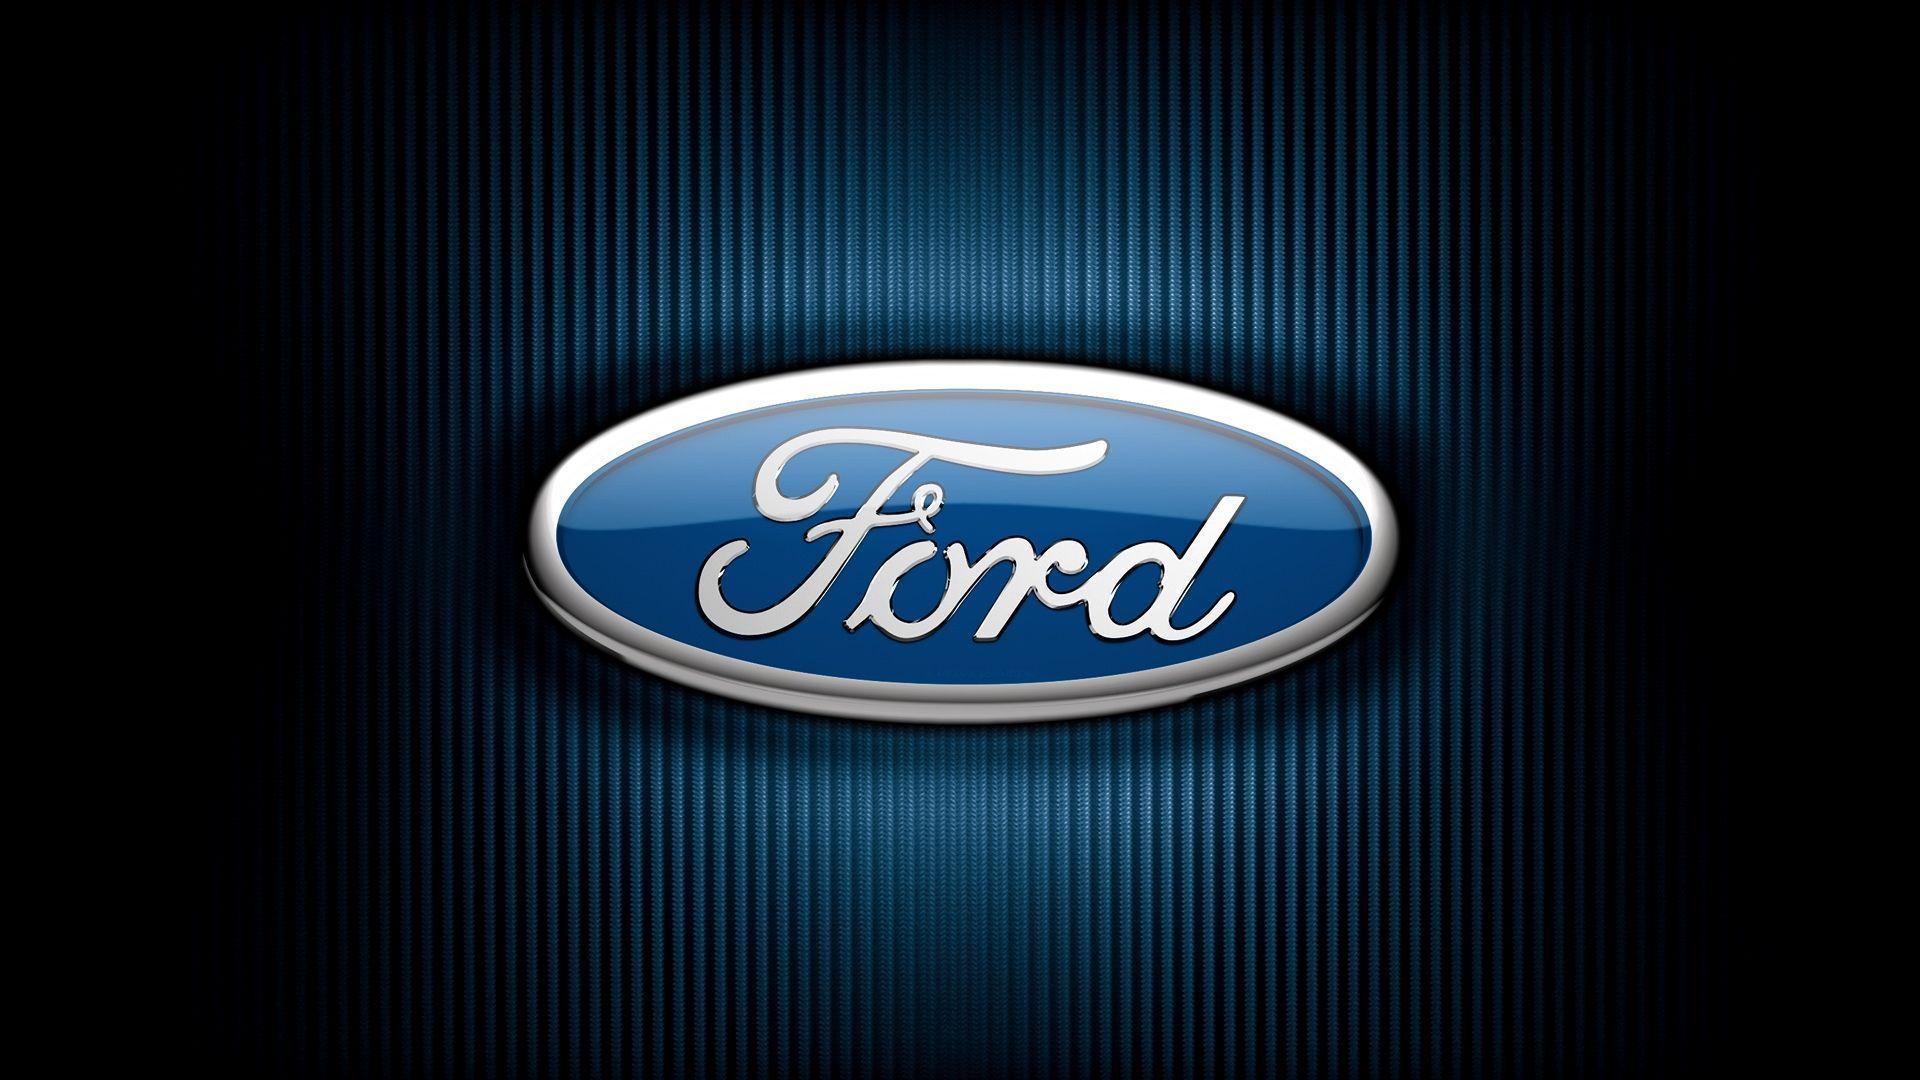 Cool Ford Logo - Ford Logo Wallpapers - Wallpaper Cave